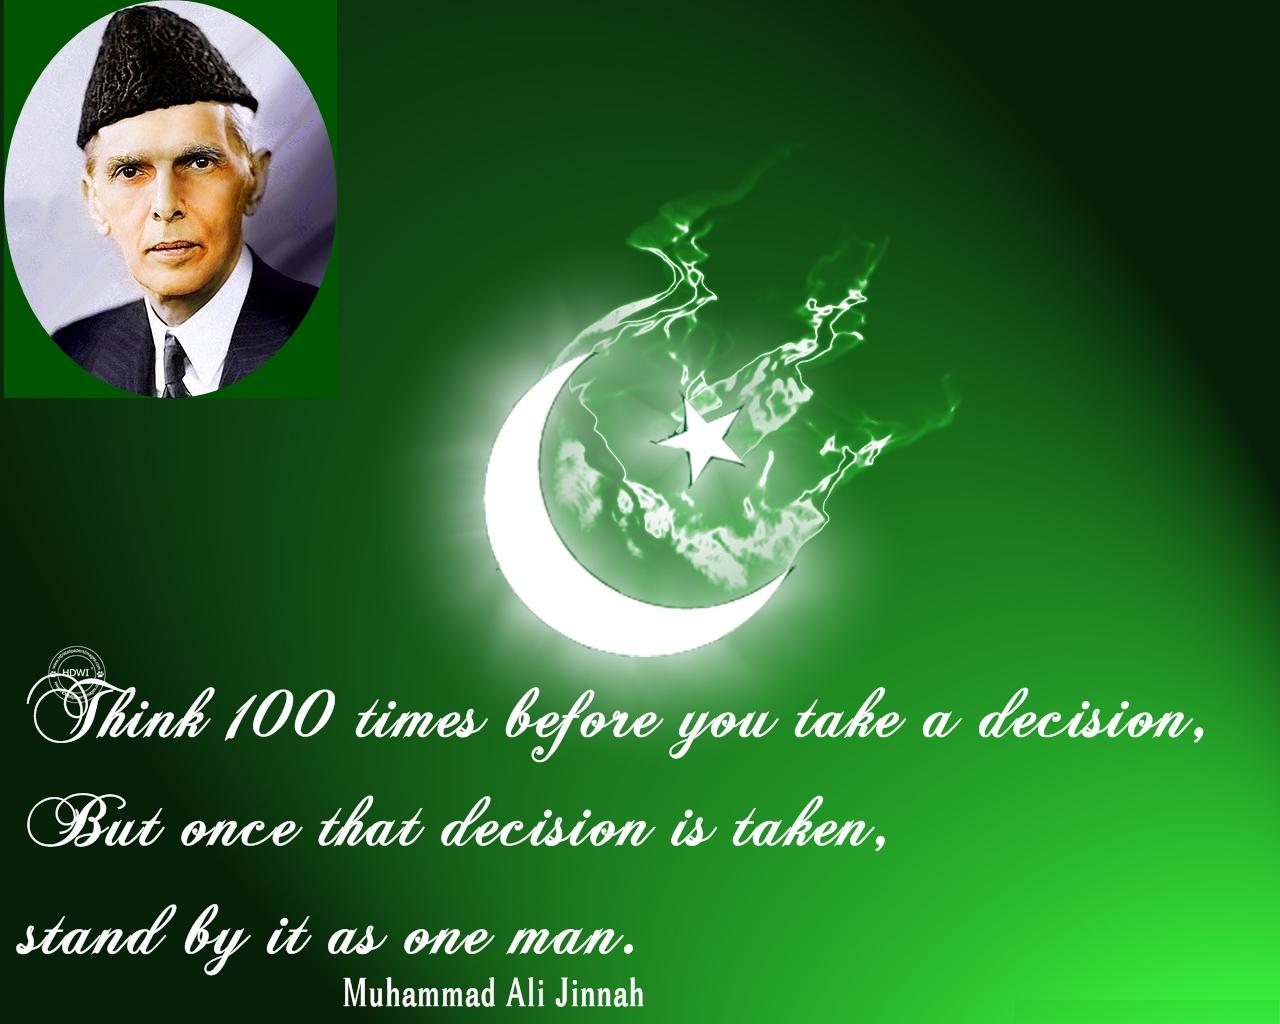 Happy Pakistan Independence Day 2017 Wishes Quotes Messages Whatsapp Status Dp Images